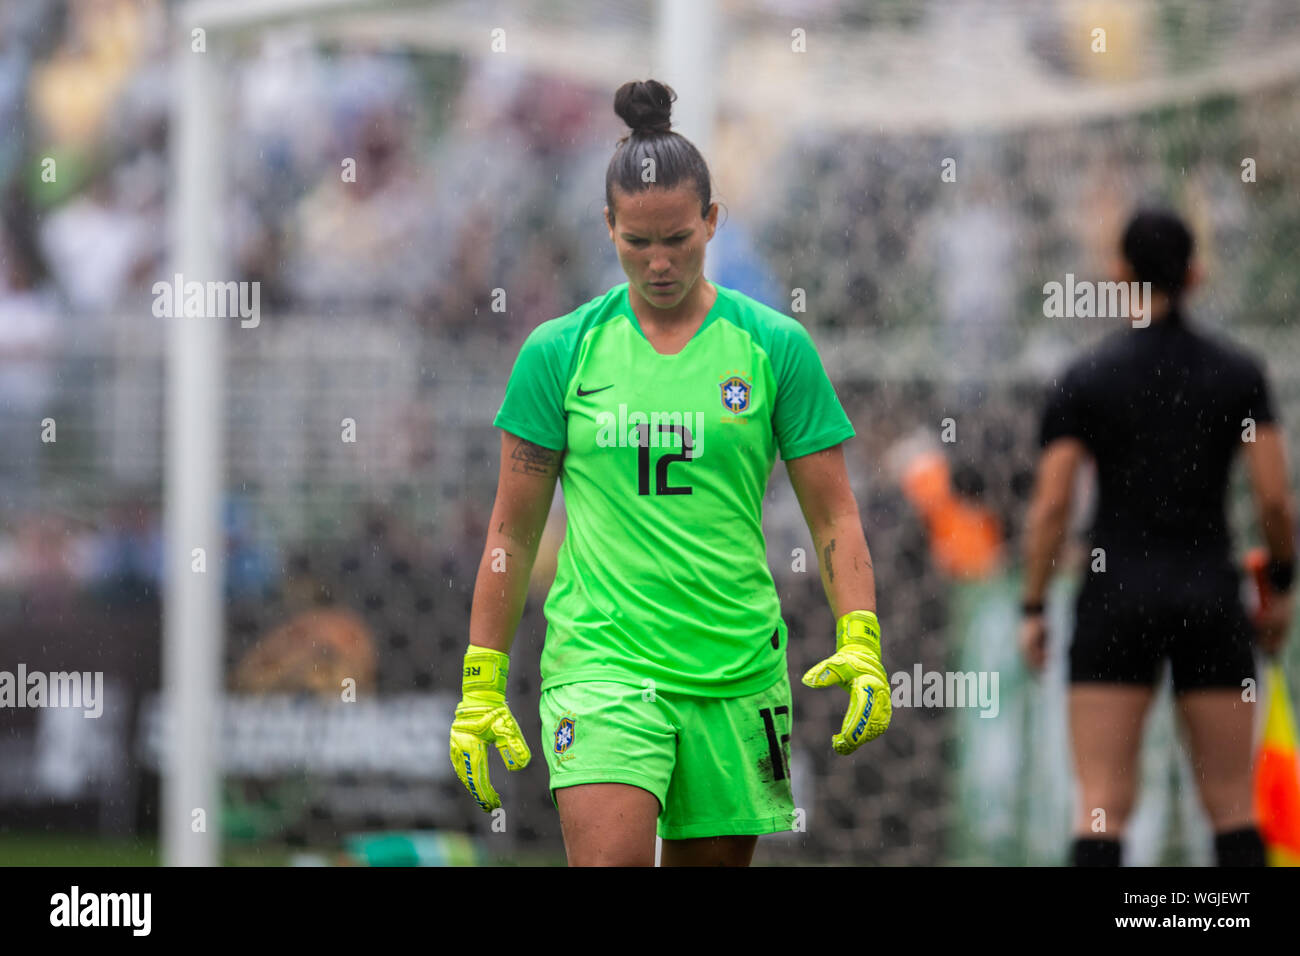 SÃO PAULO, SP - 01.09.2019: BRAZIL X CHILE - Brazil goalkeeper Aline Reis, even with perfect performance in the penalty shootout, could not guarantee the victory of Brazil. Uber Women'ccer Cup Cup - Chilean national team wins the Brazilian women&am9;s soccer team on penalties after a 0-0 dra draw in normal time. With a lot of rain, which disrupted the football of both teams, and with audience of 15,047 paying and income of $ 174,073.00. The match took place this Sunday, September 1st, 2019, at Pacaembu Stadium, in São Paulo. (Photo: Van Campos/Fotoarena) Stock Photo